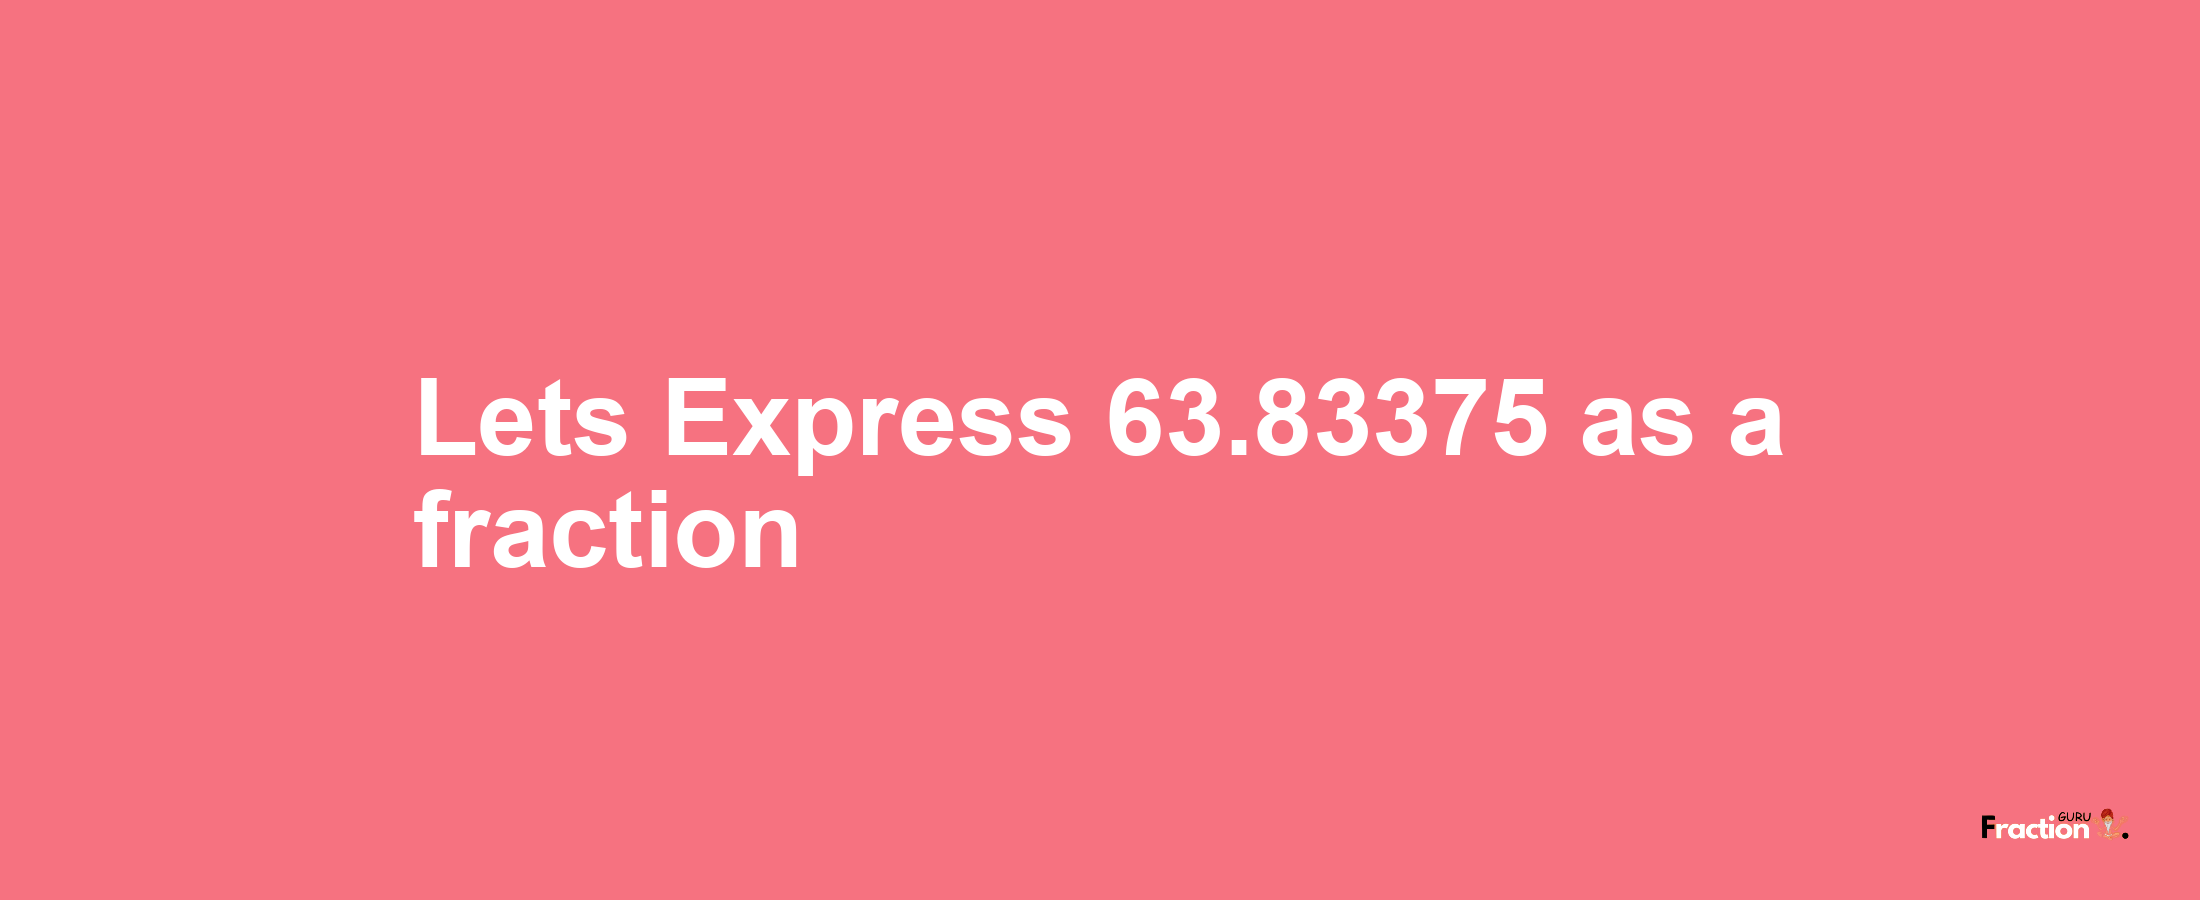 Lets Express 63.83375 as afraction